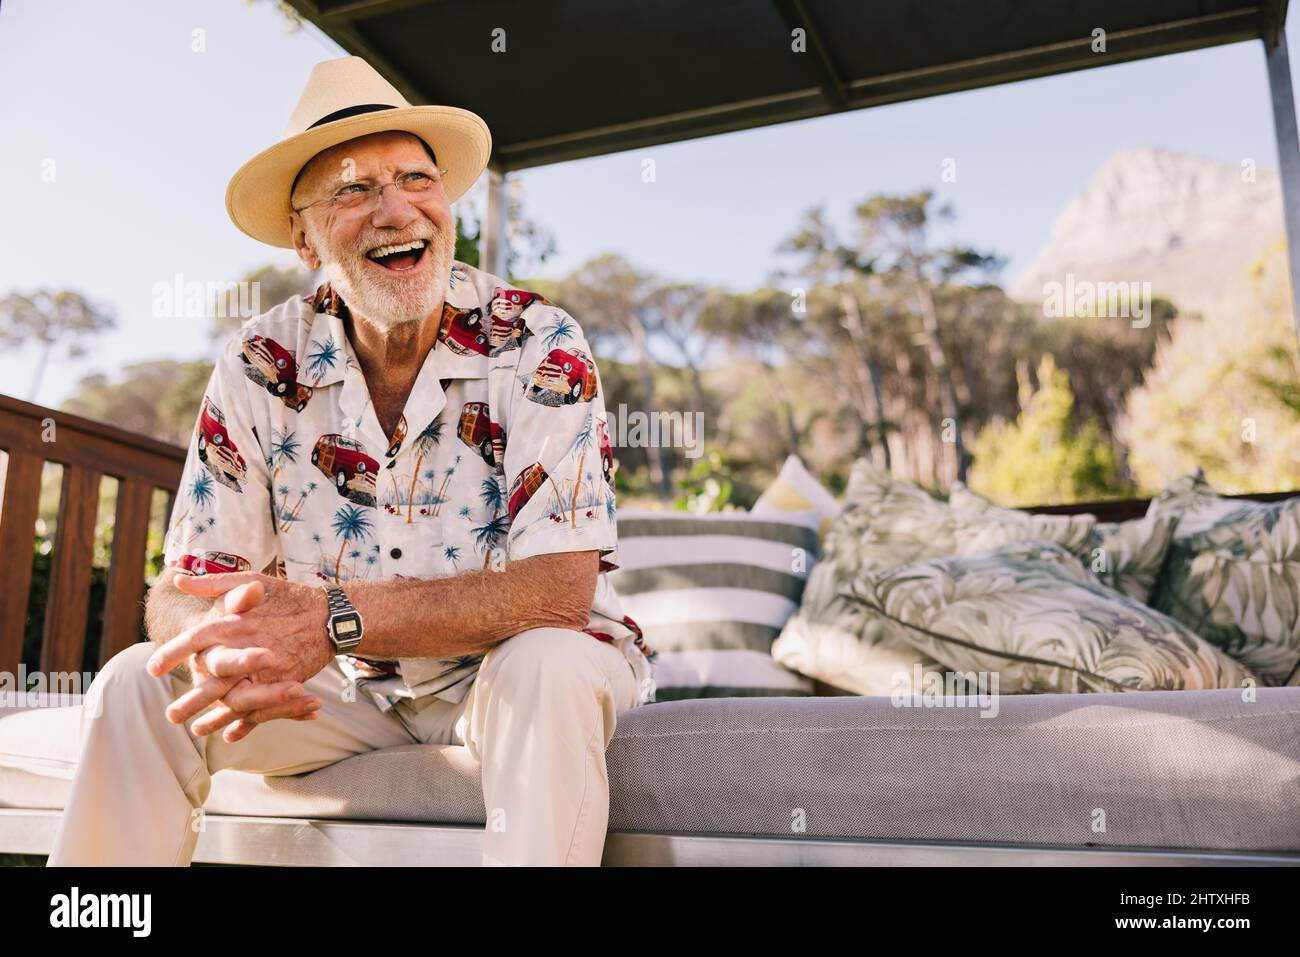 vacationing after retirement. Happy elderly man laughing cheerfully while relaxing on a couch at a luxury spa resort. Carefree senior man enjoying him Stock Photo